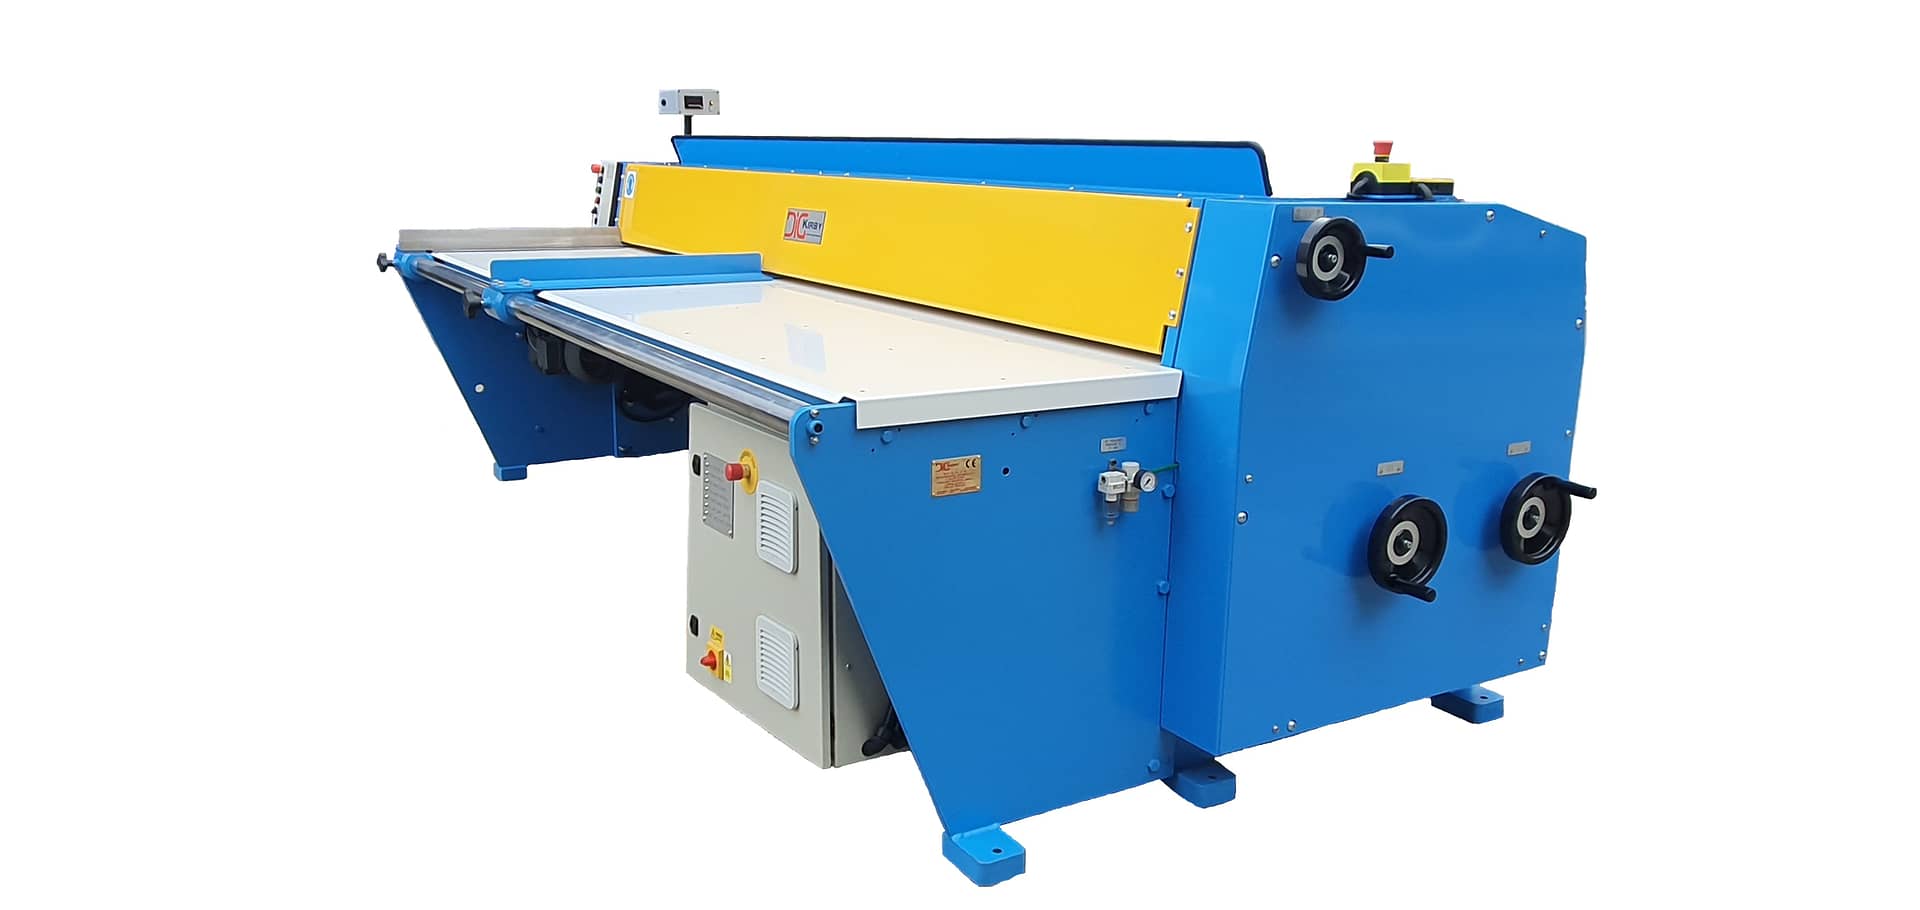 Kirby Slitter Creaser with Air Shafts and Digital Rule Bars